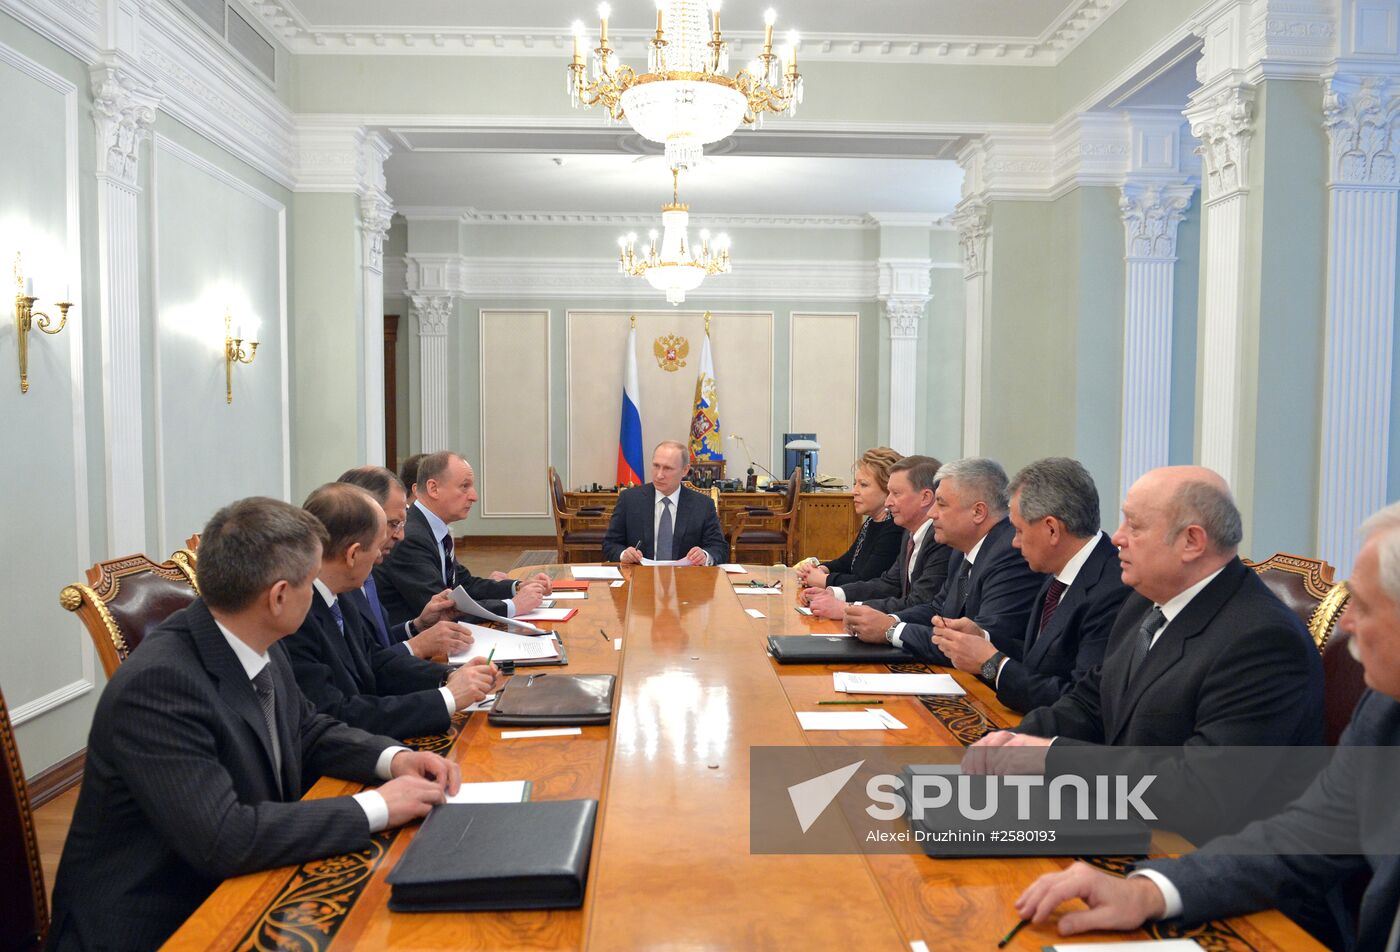 President Vladimir Putin holds meeting with permanent members of the Russian Security Council